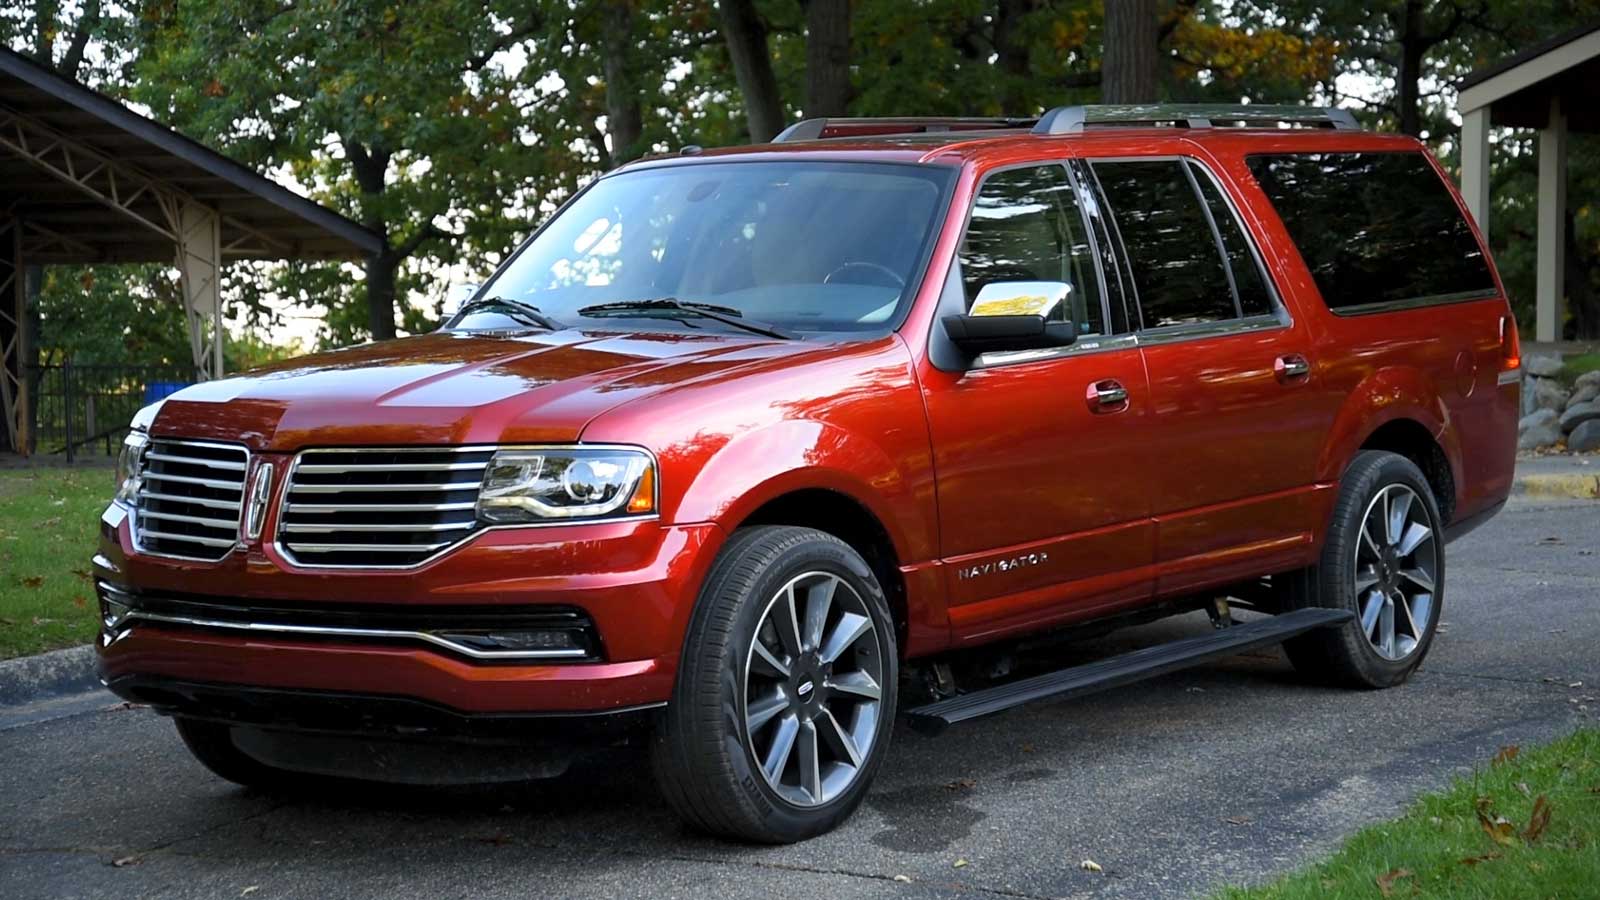 2016 Lincoln Navigator L Review: Curbed with Craig Cole - AutoGuide.com